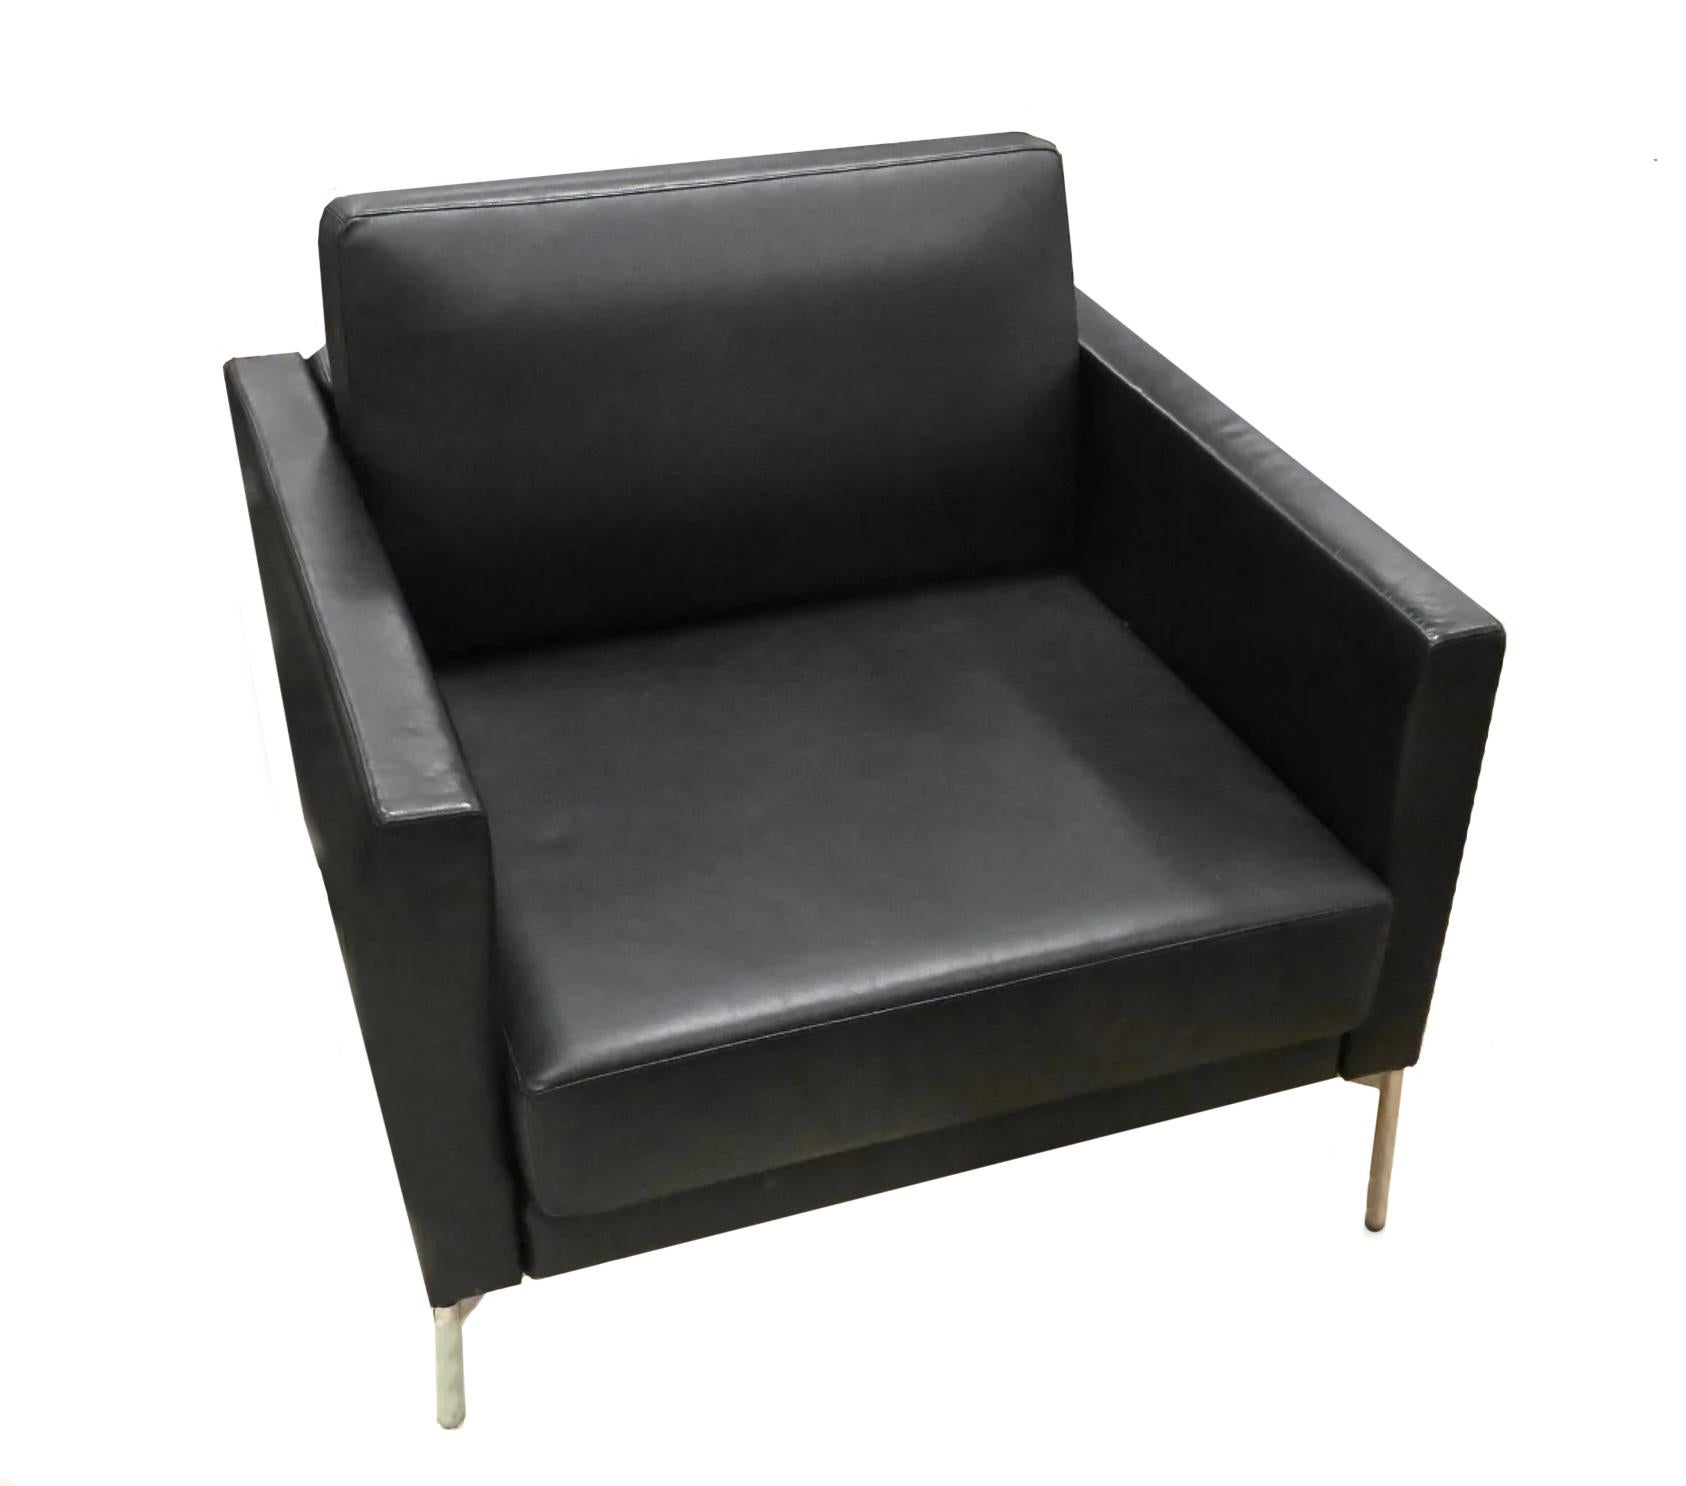 Pair of Modern Piero Lissoni for Knoll Divina Club Lounge Chairs Black Leather For Sale 1